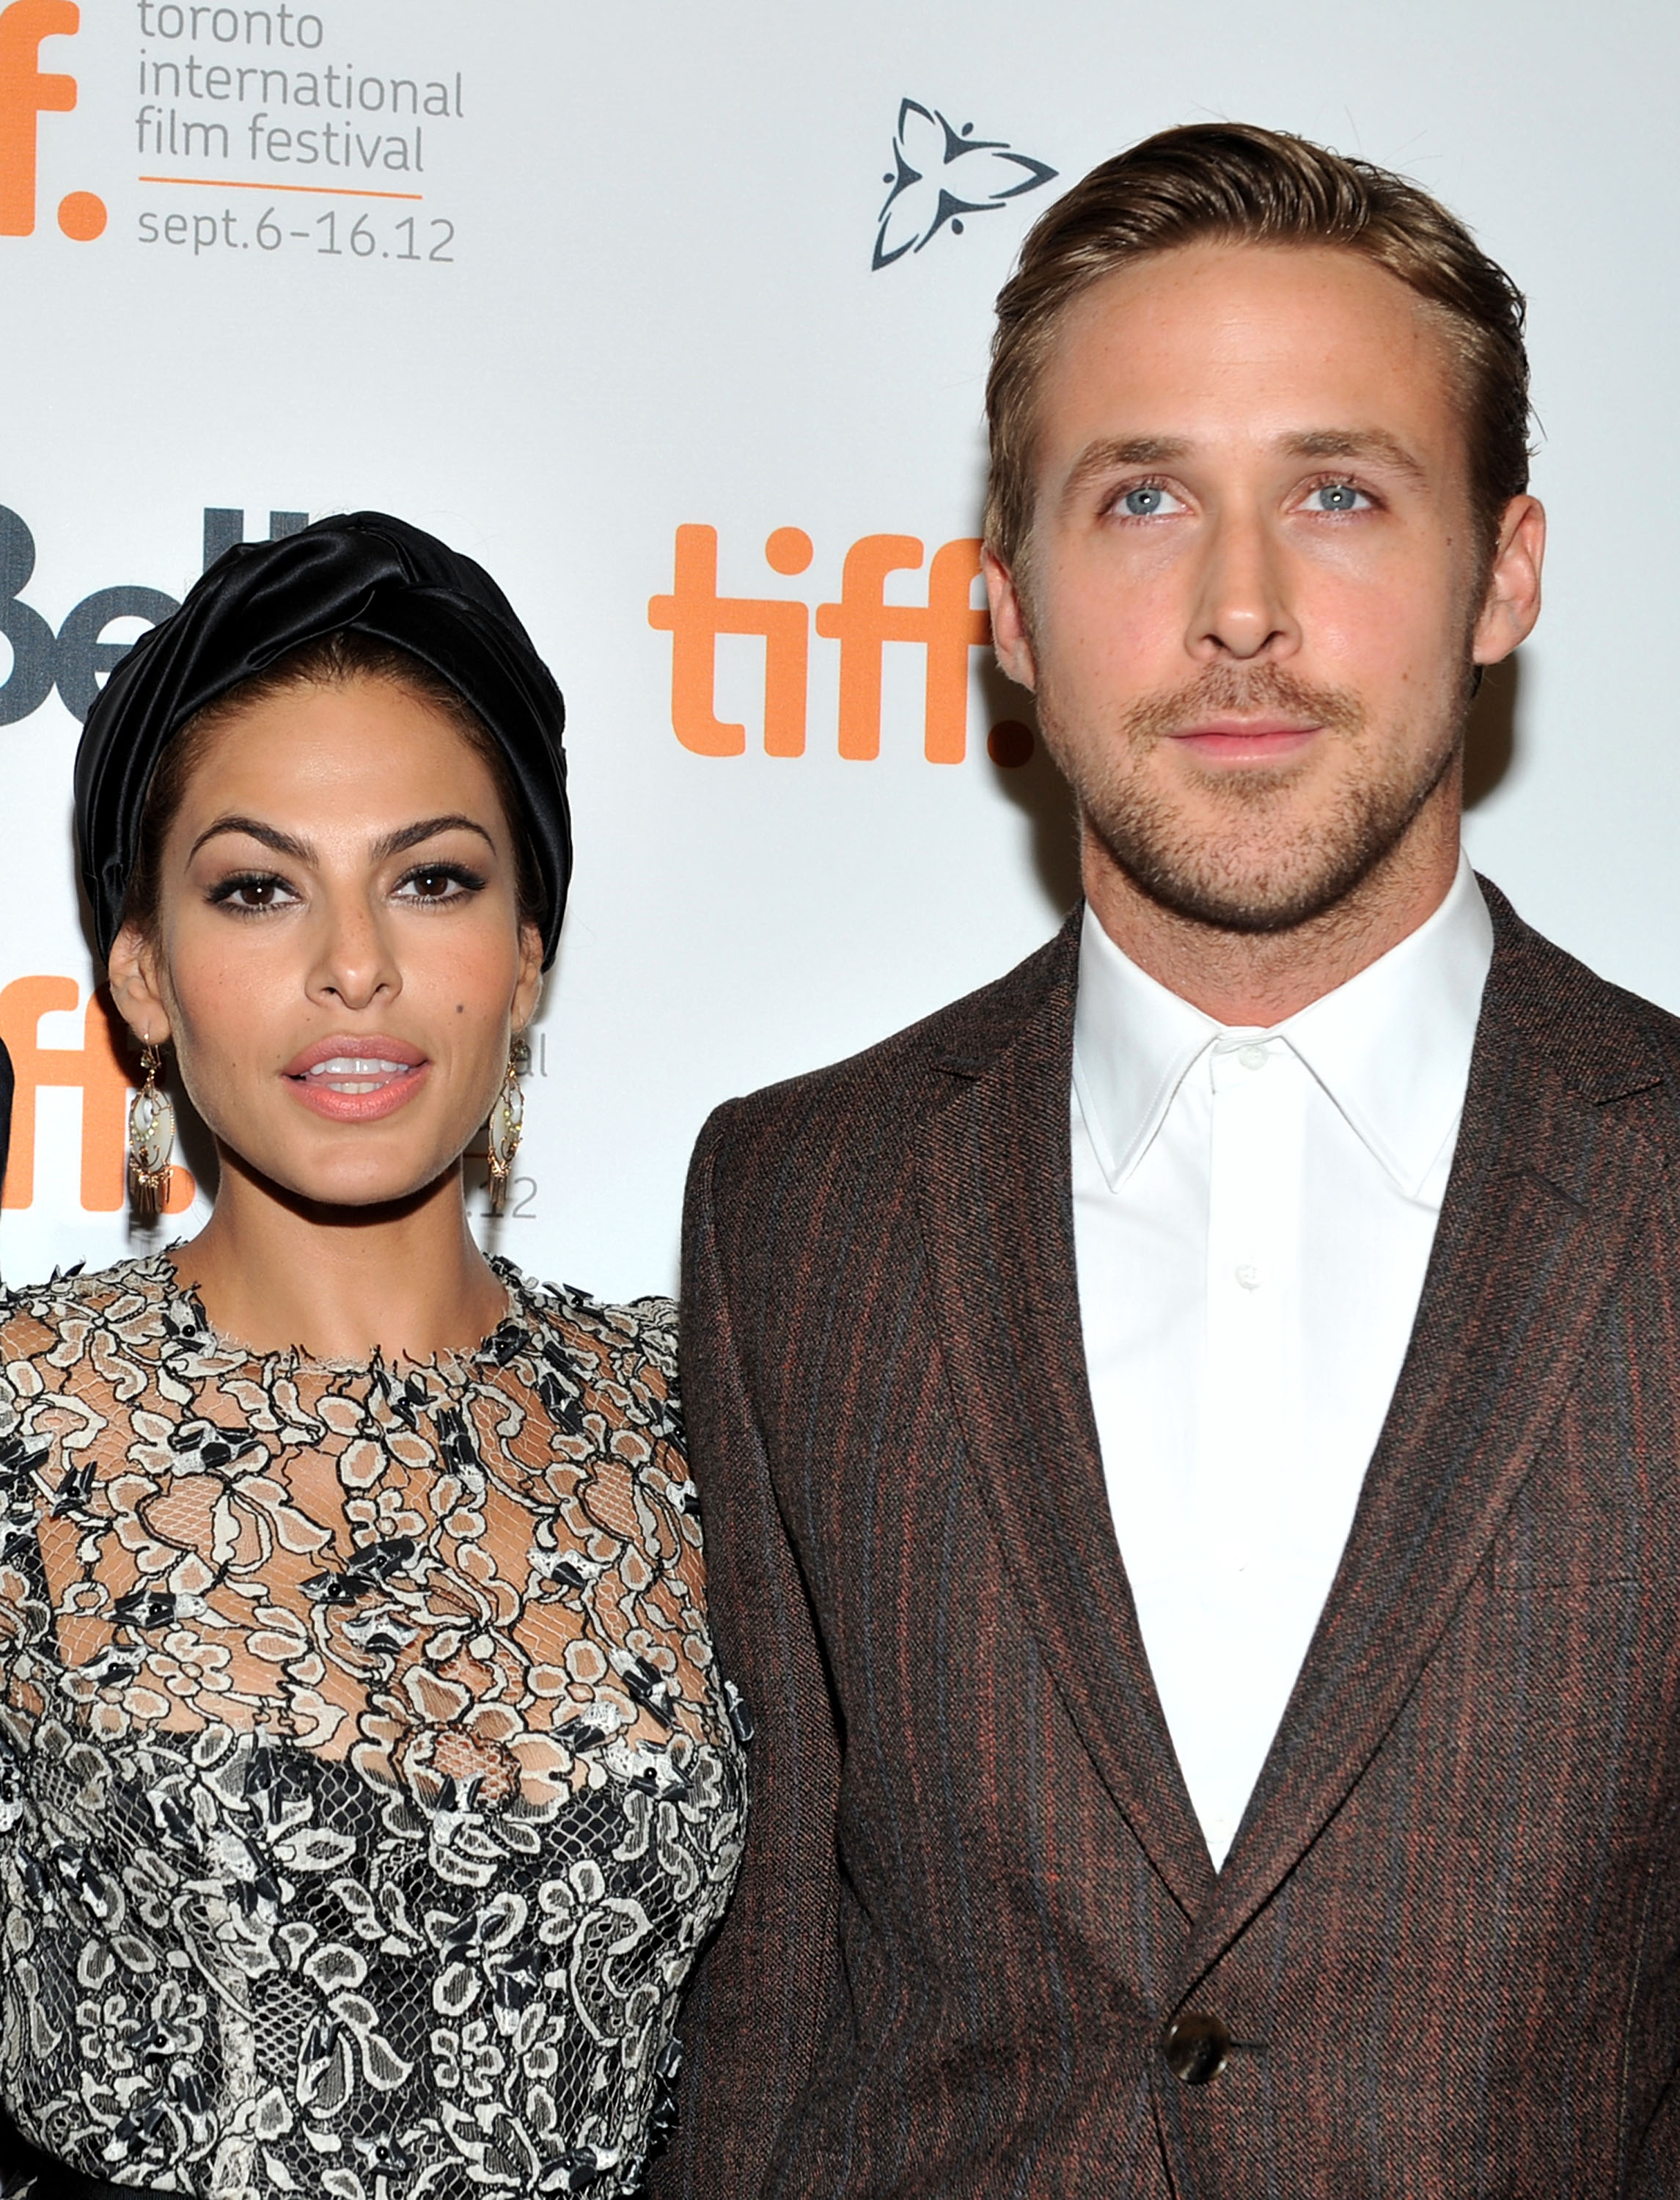 She and her husband Ryan Gosling are notoriously private